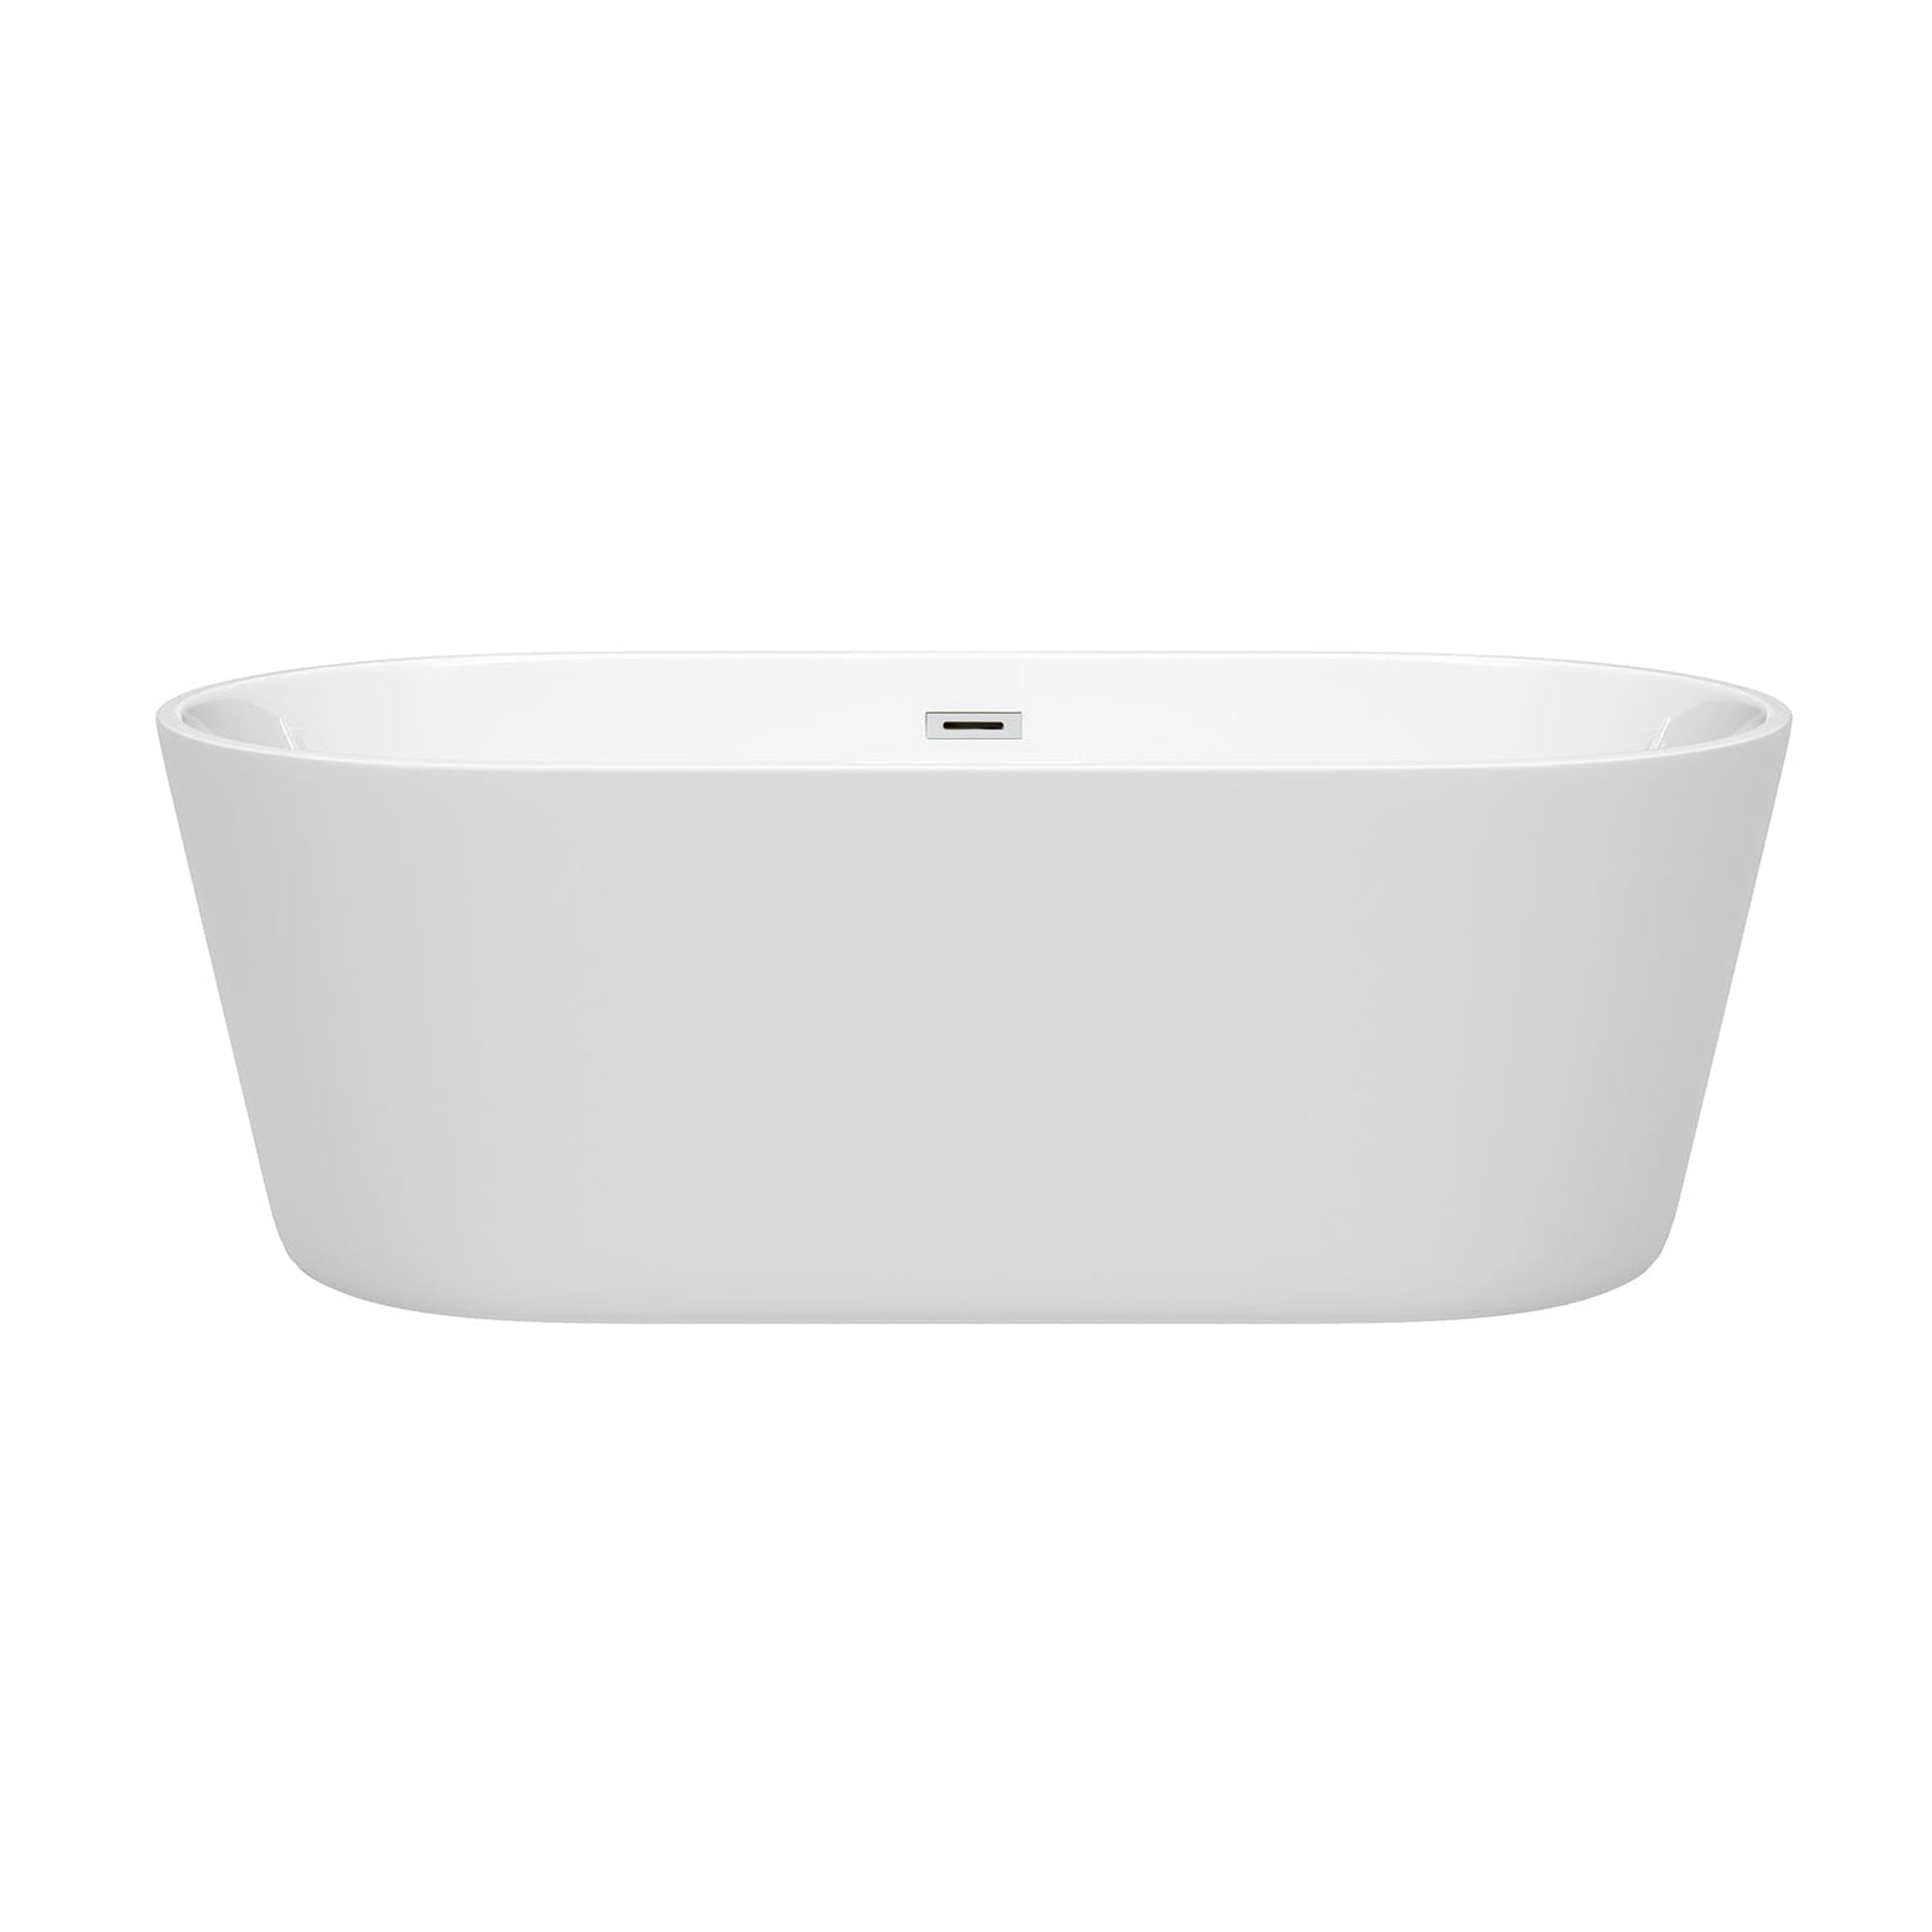 Wyndham Collection Carissa 67" Freestanding Bathtub in White With Polished Chrome Drain and Overflow Trim